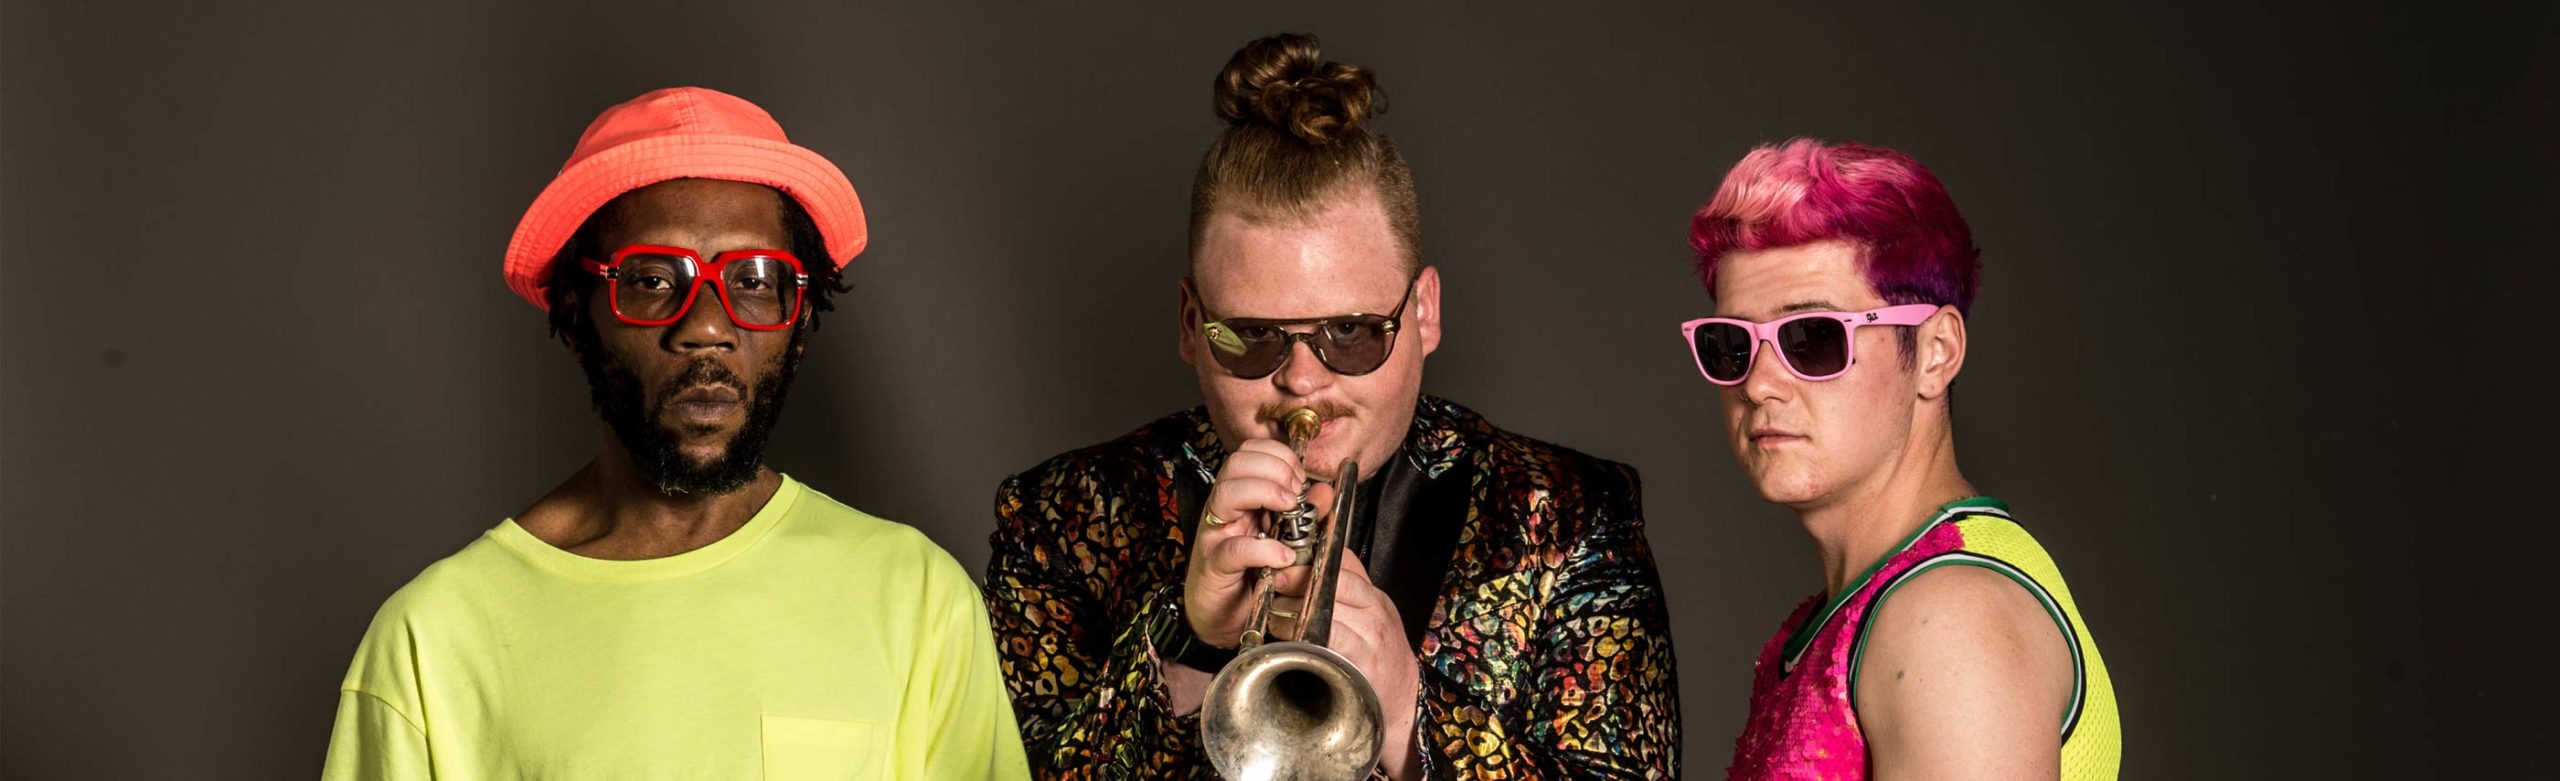 Brass House Trio Too Many Zooz Will Return to Missoula for Headlining Concert Image